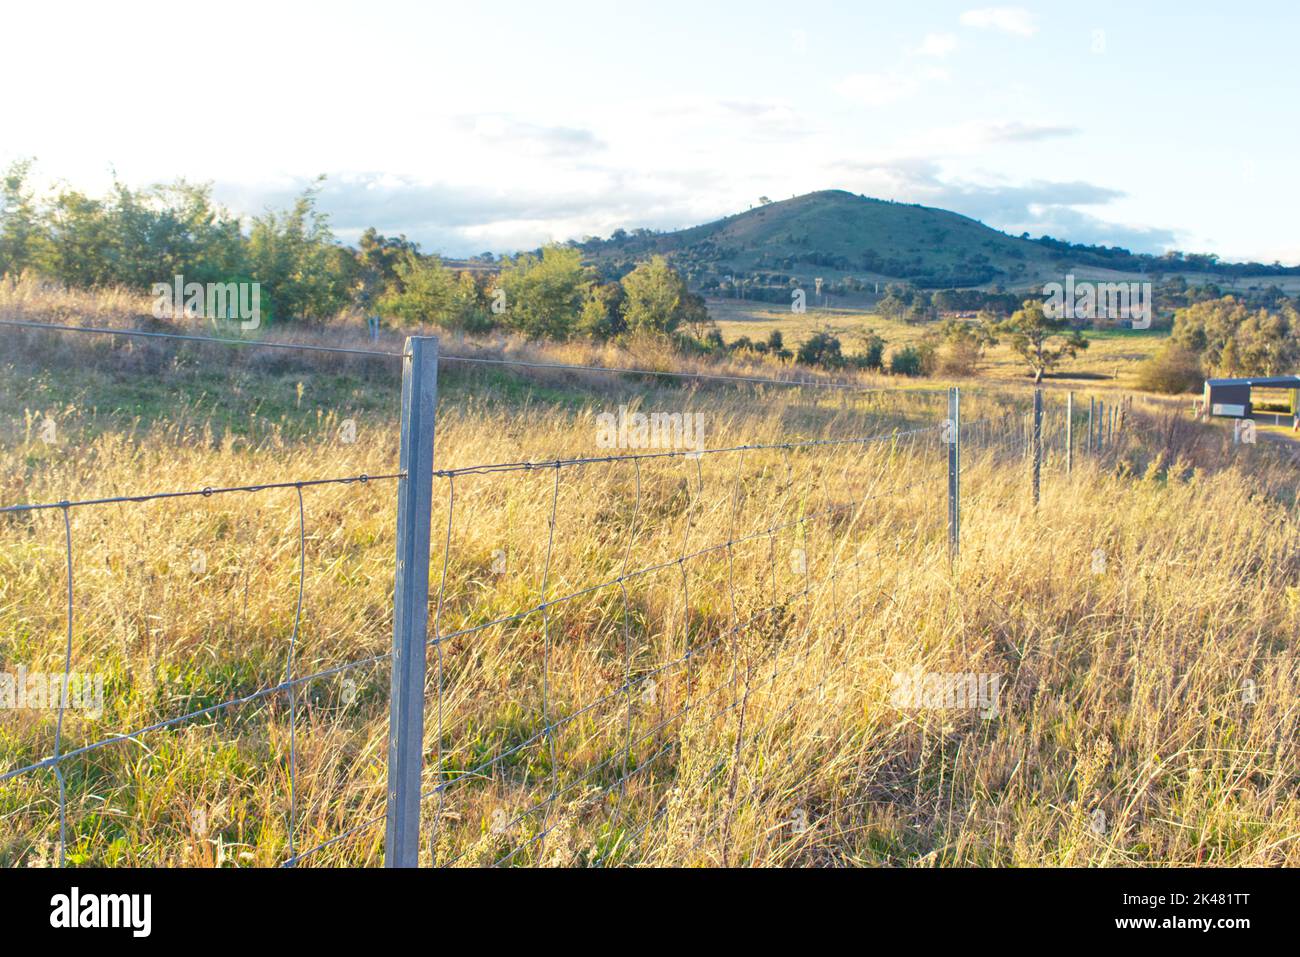 sunset as seen from a metal fence in a farming area with a mountain seen in the background Stock Photo